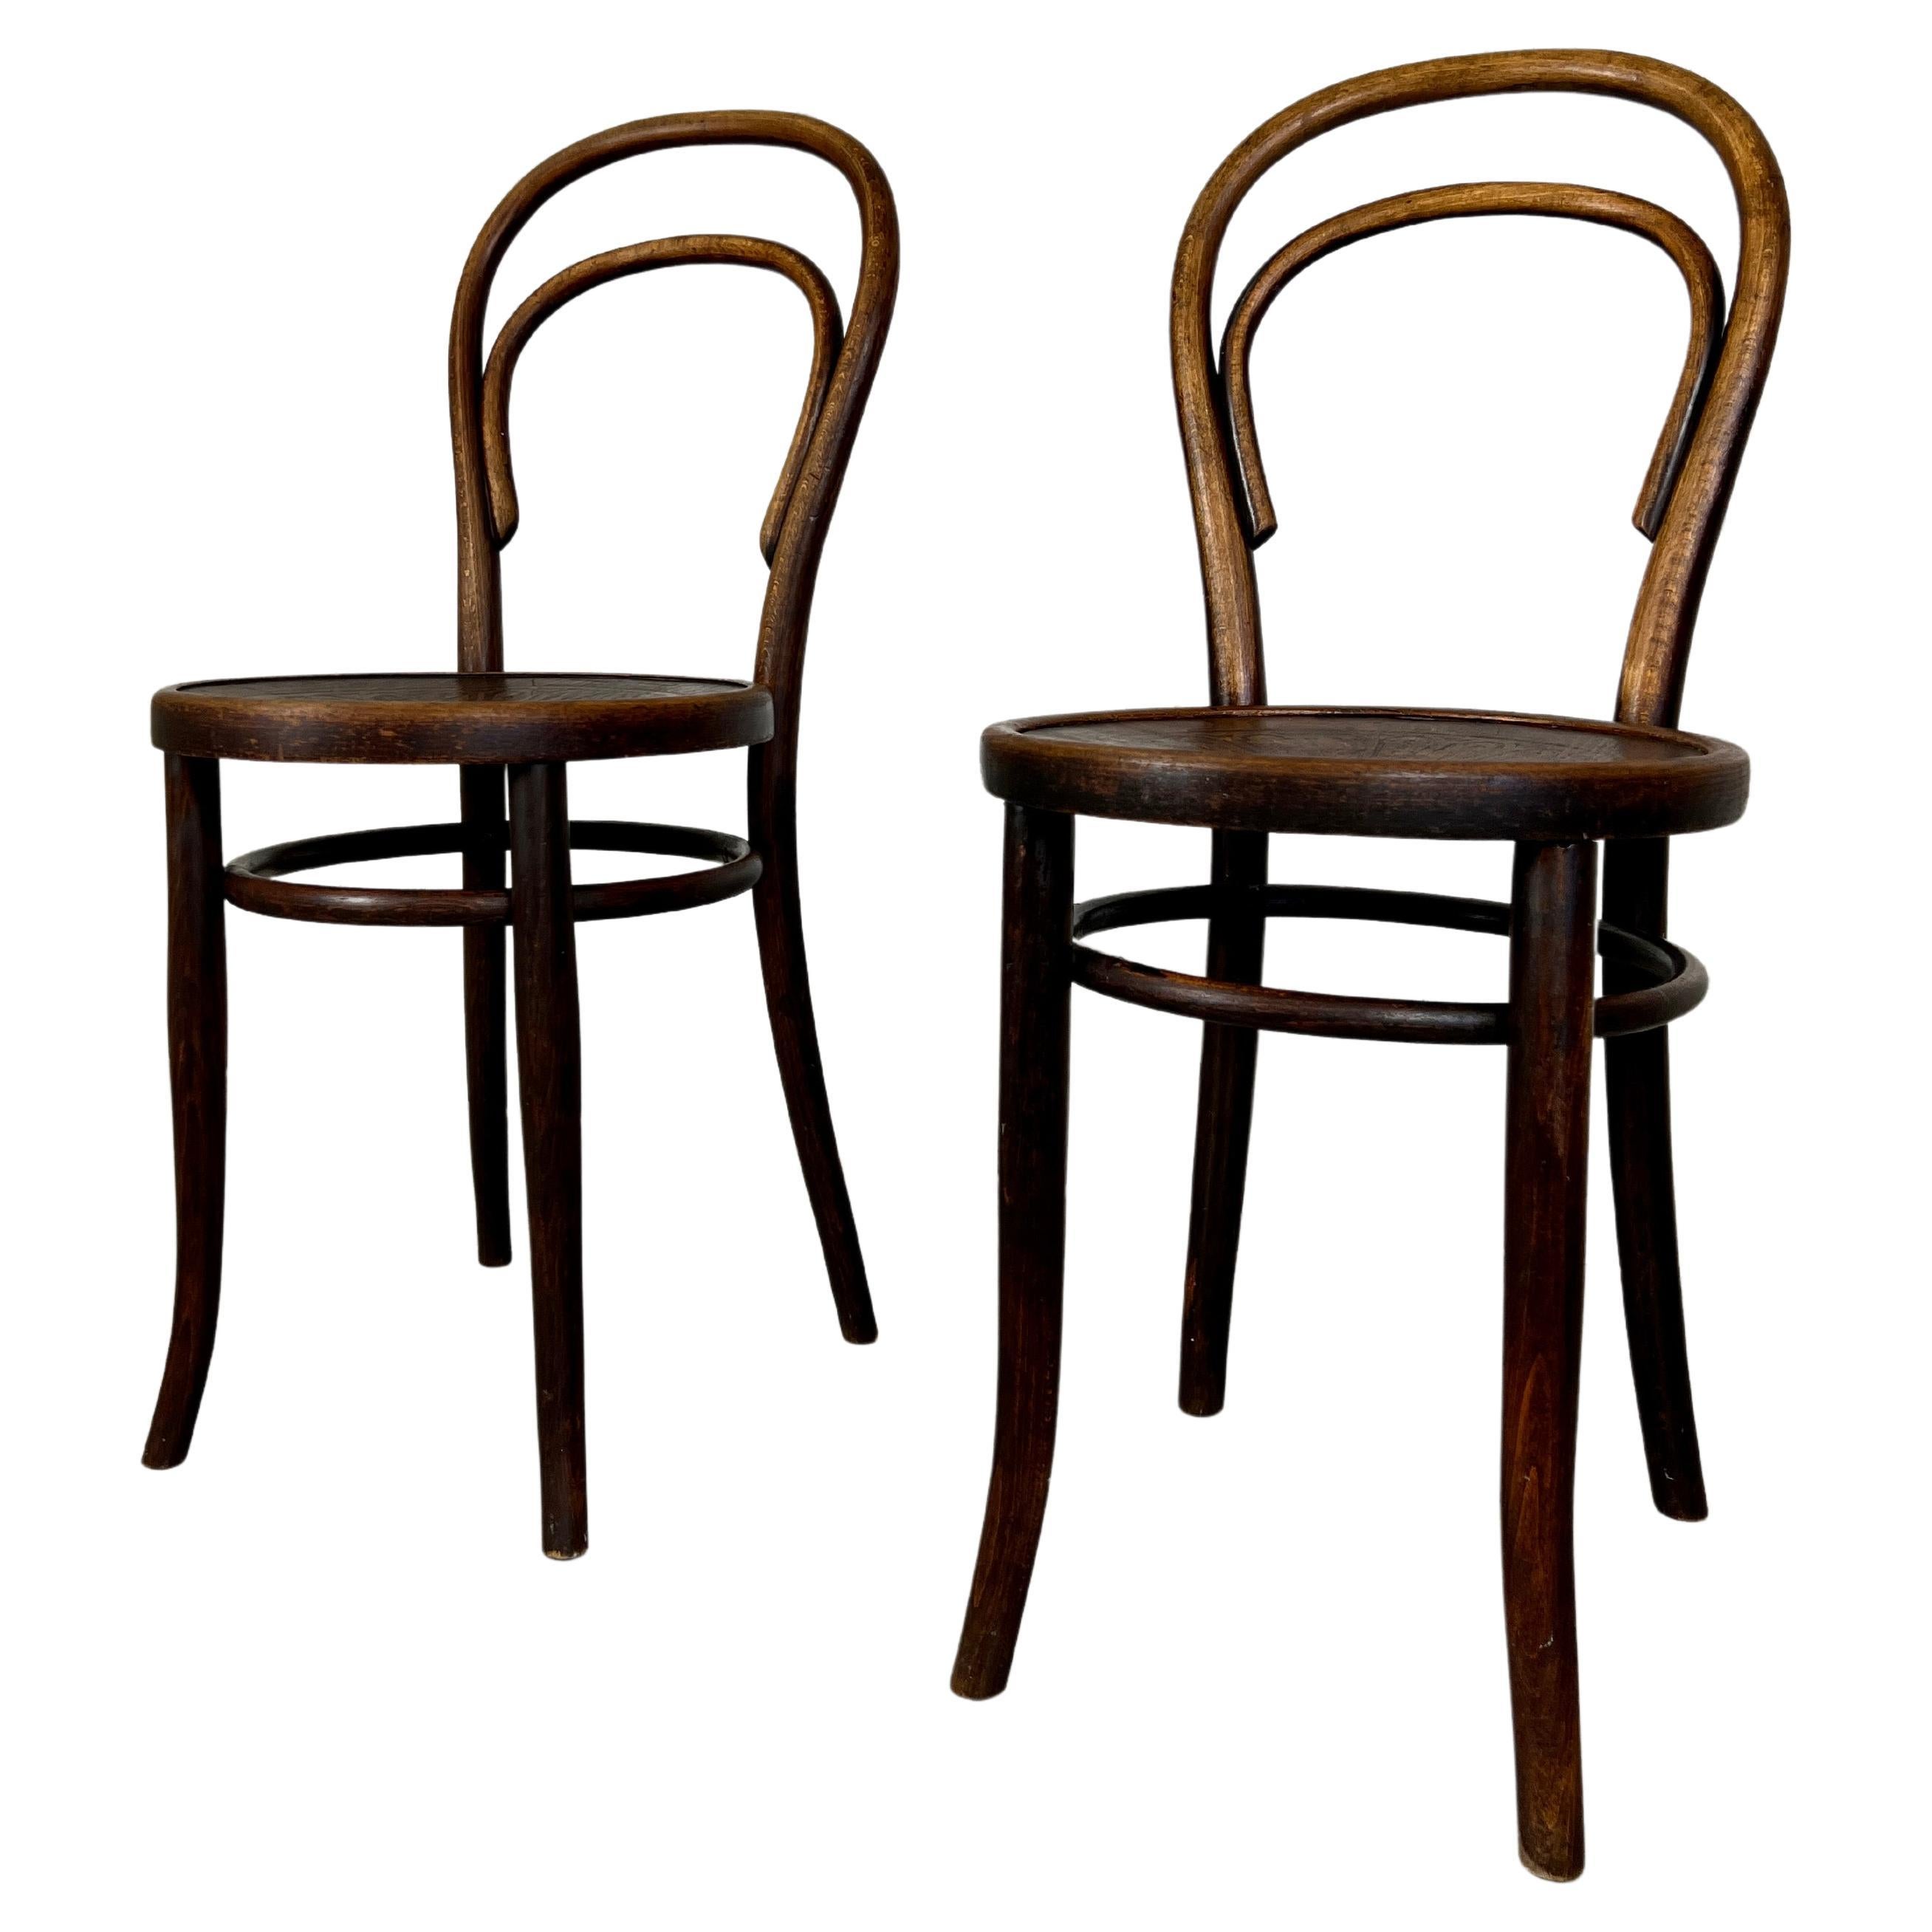 Pair of Vintage Thonet No.14 Bentwood Chairs